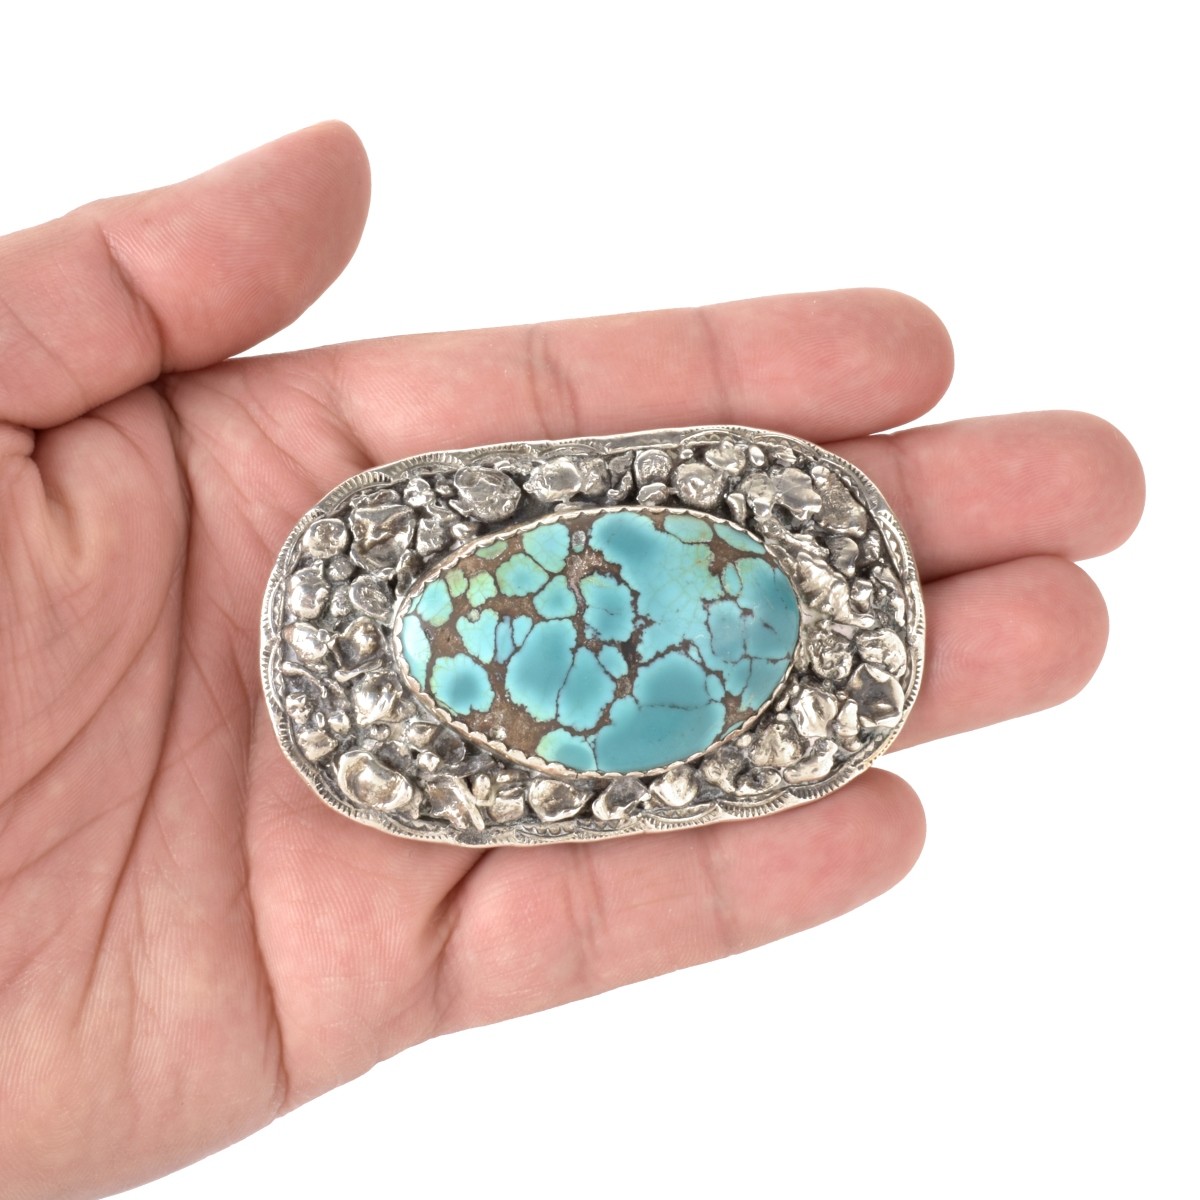 Turquoise and Silver Belt Buckle